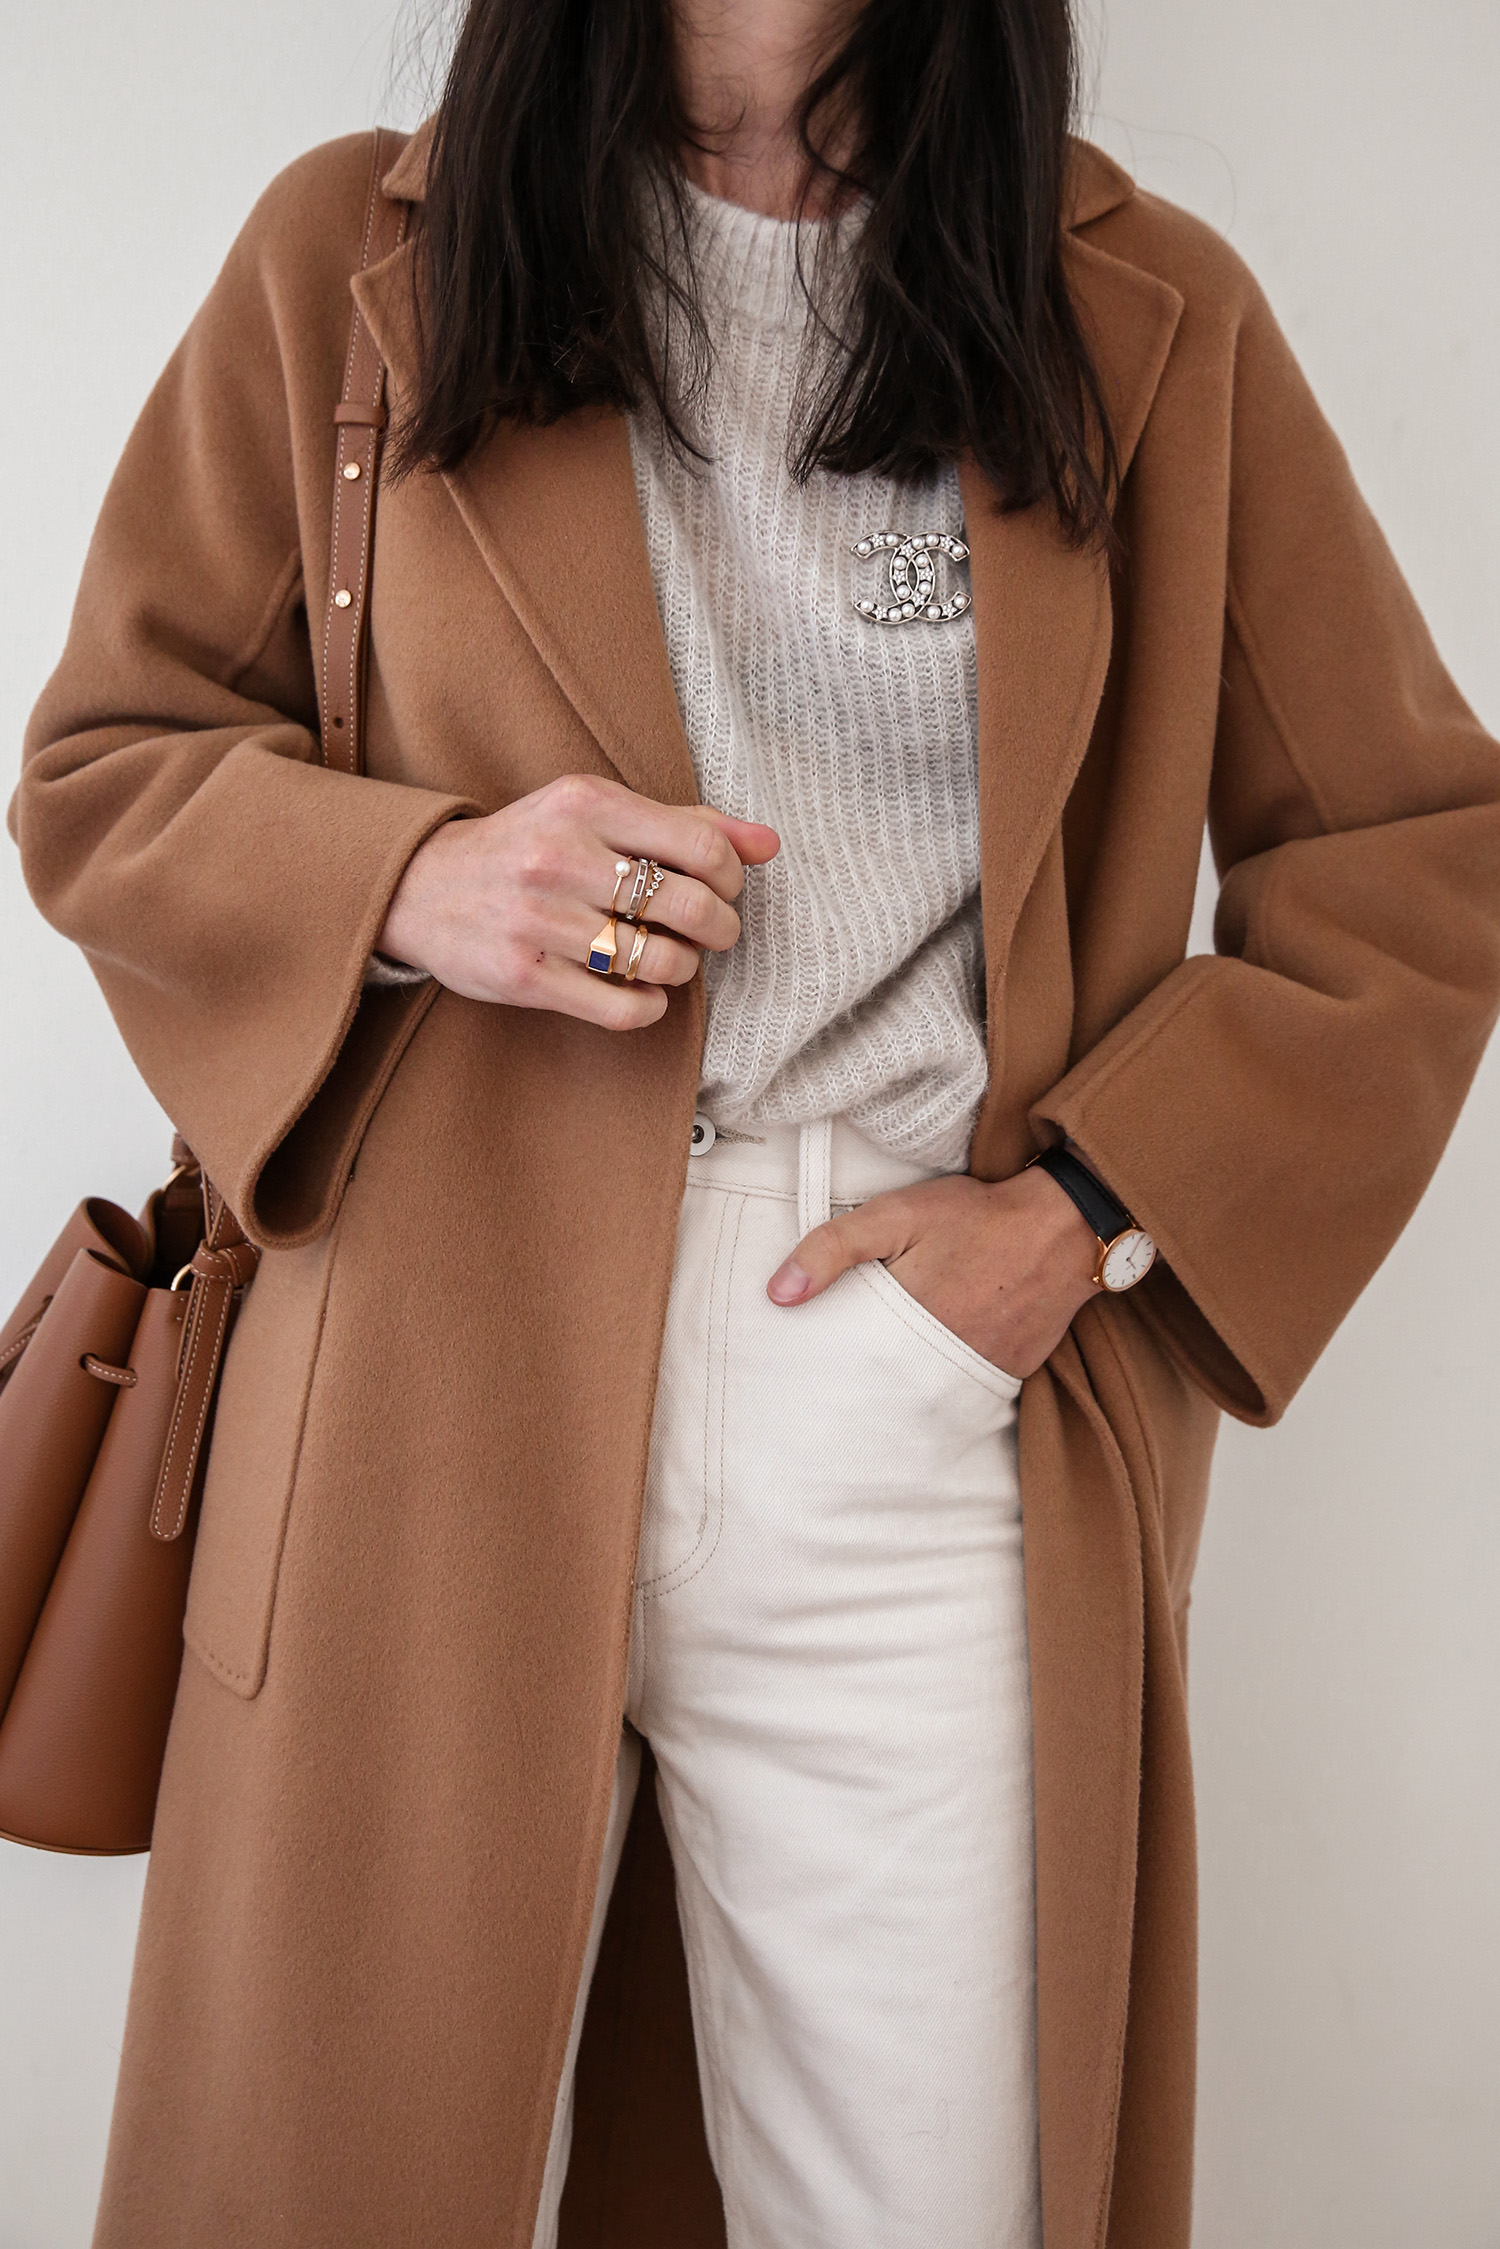 The Curated Classic coat in camel with Polene numero huit bag